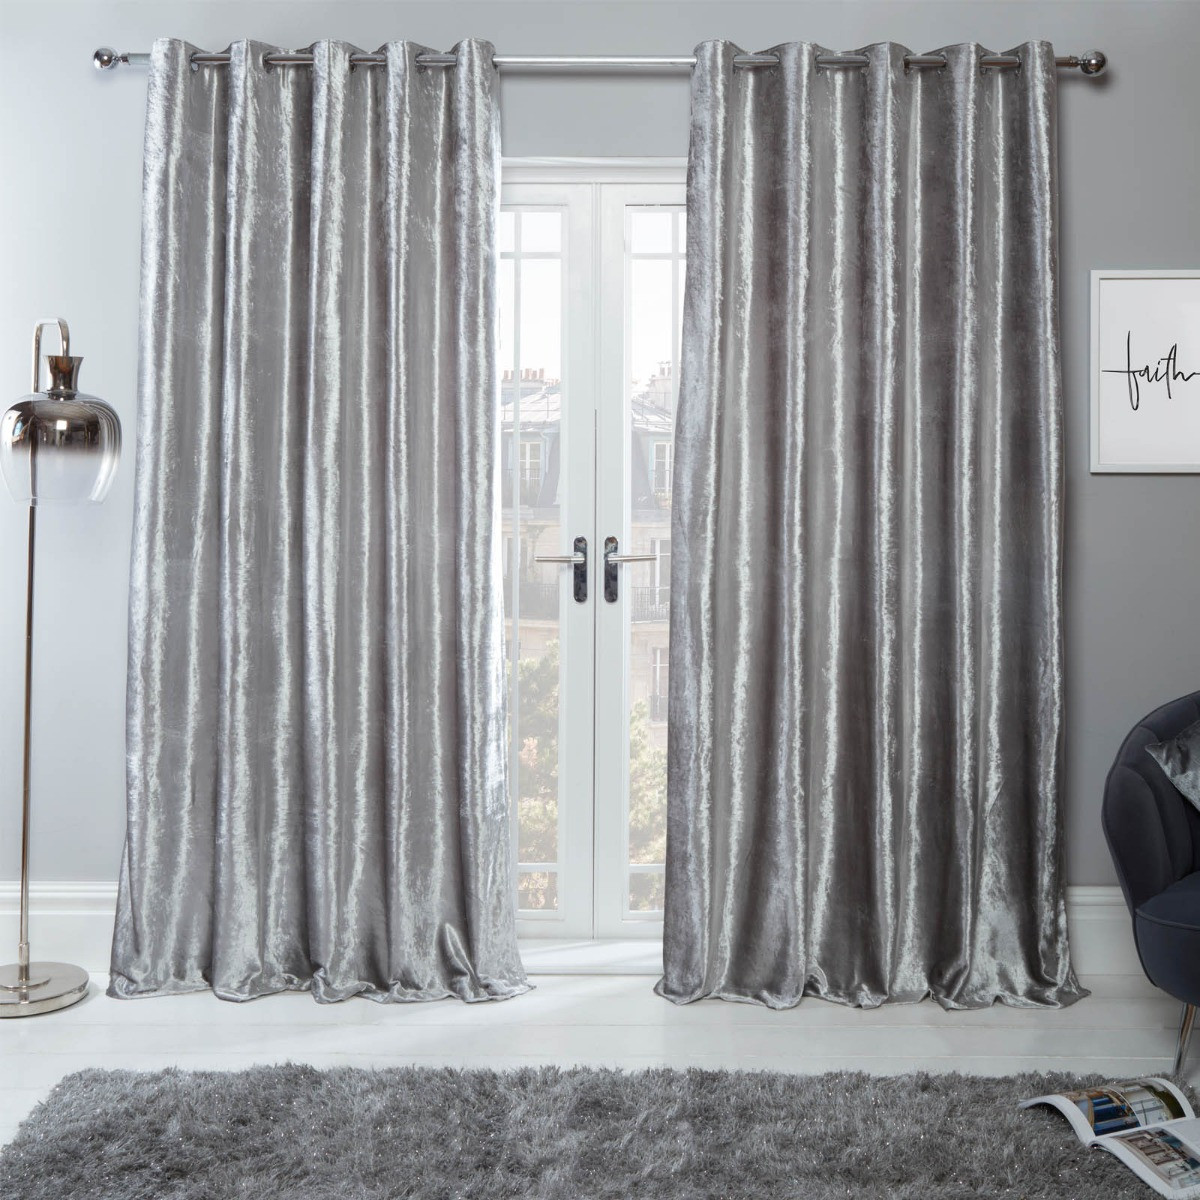 Sienna Home Crushed Velvet Eyelet Curtains - Silver 90" x 72">